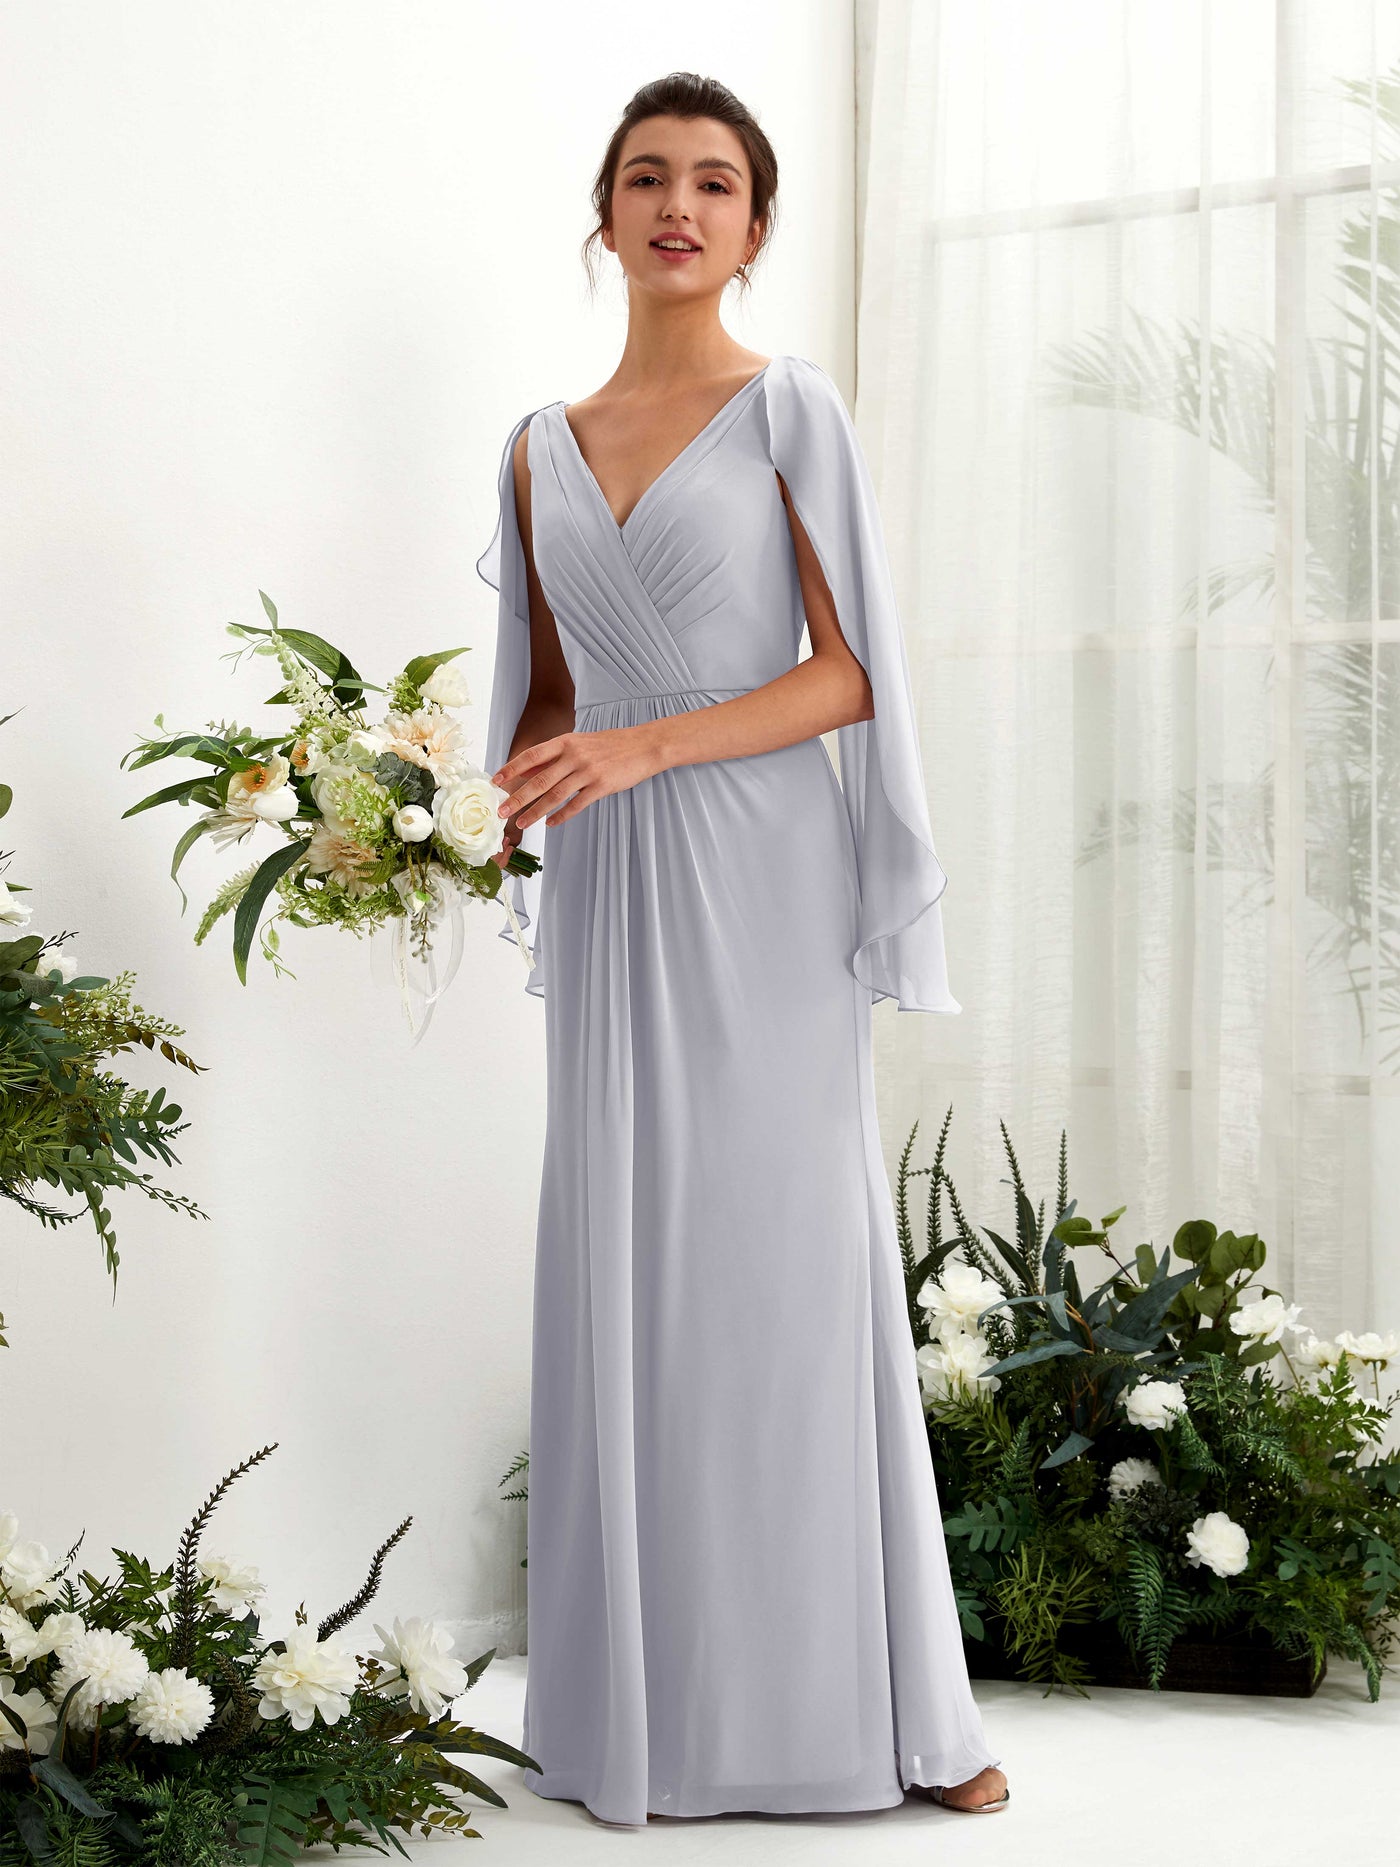 Dusty Lavender Bridesmaid Dresses Bridesmaid Dress A-line Chiffon Straps Full Length Long Sleeves Wedding Party Dress (80220103)#color_dusty-lavender